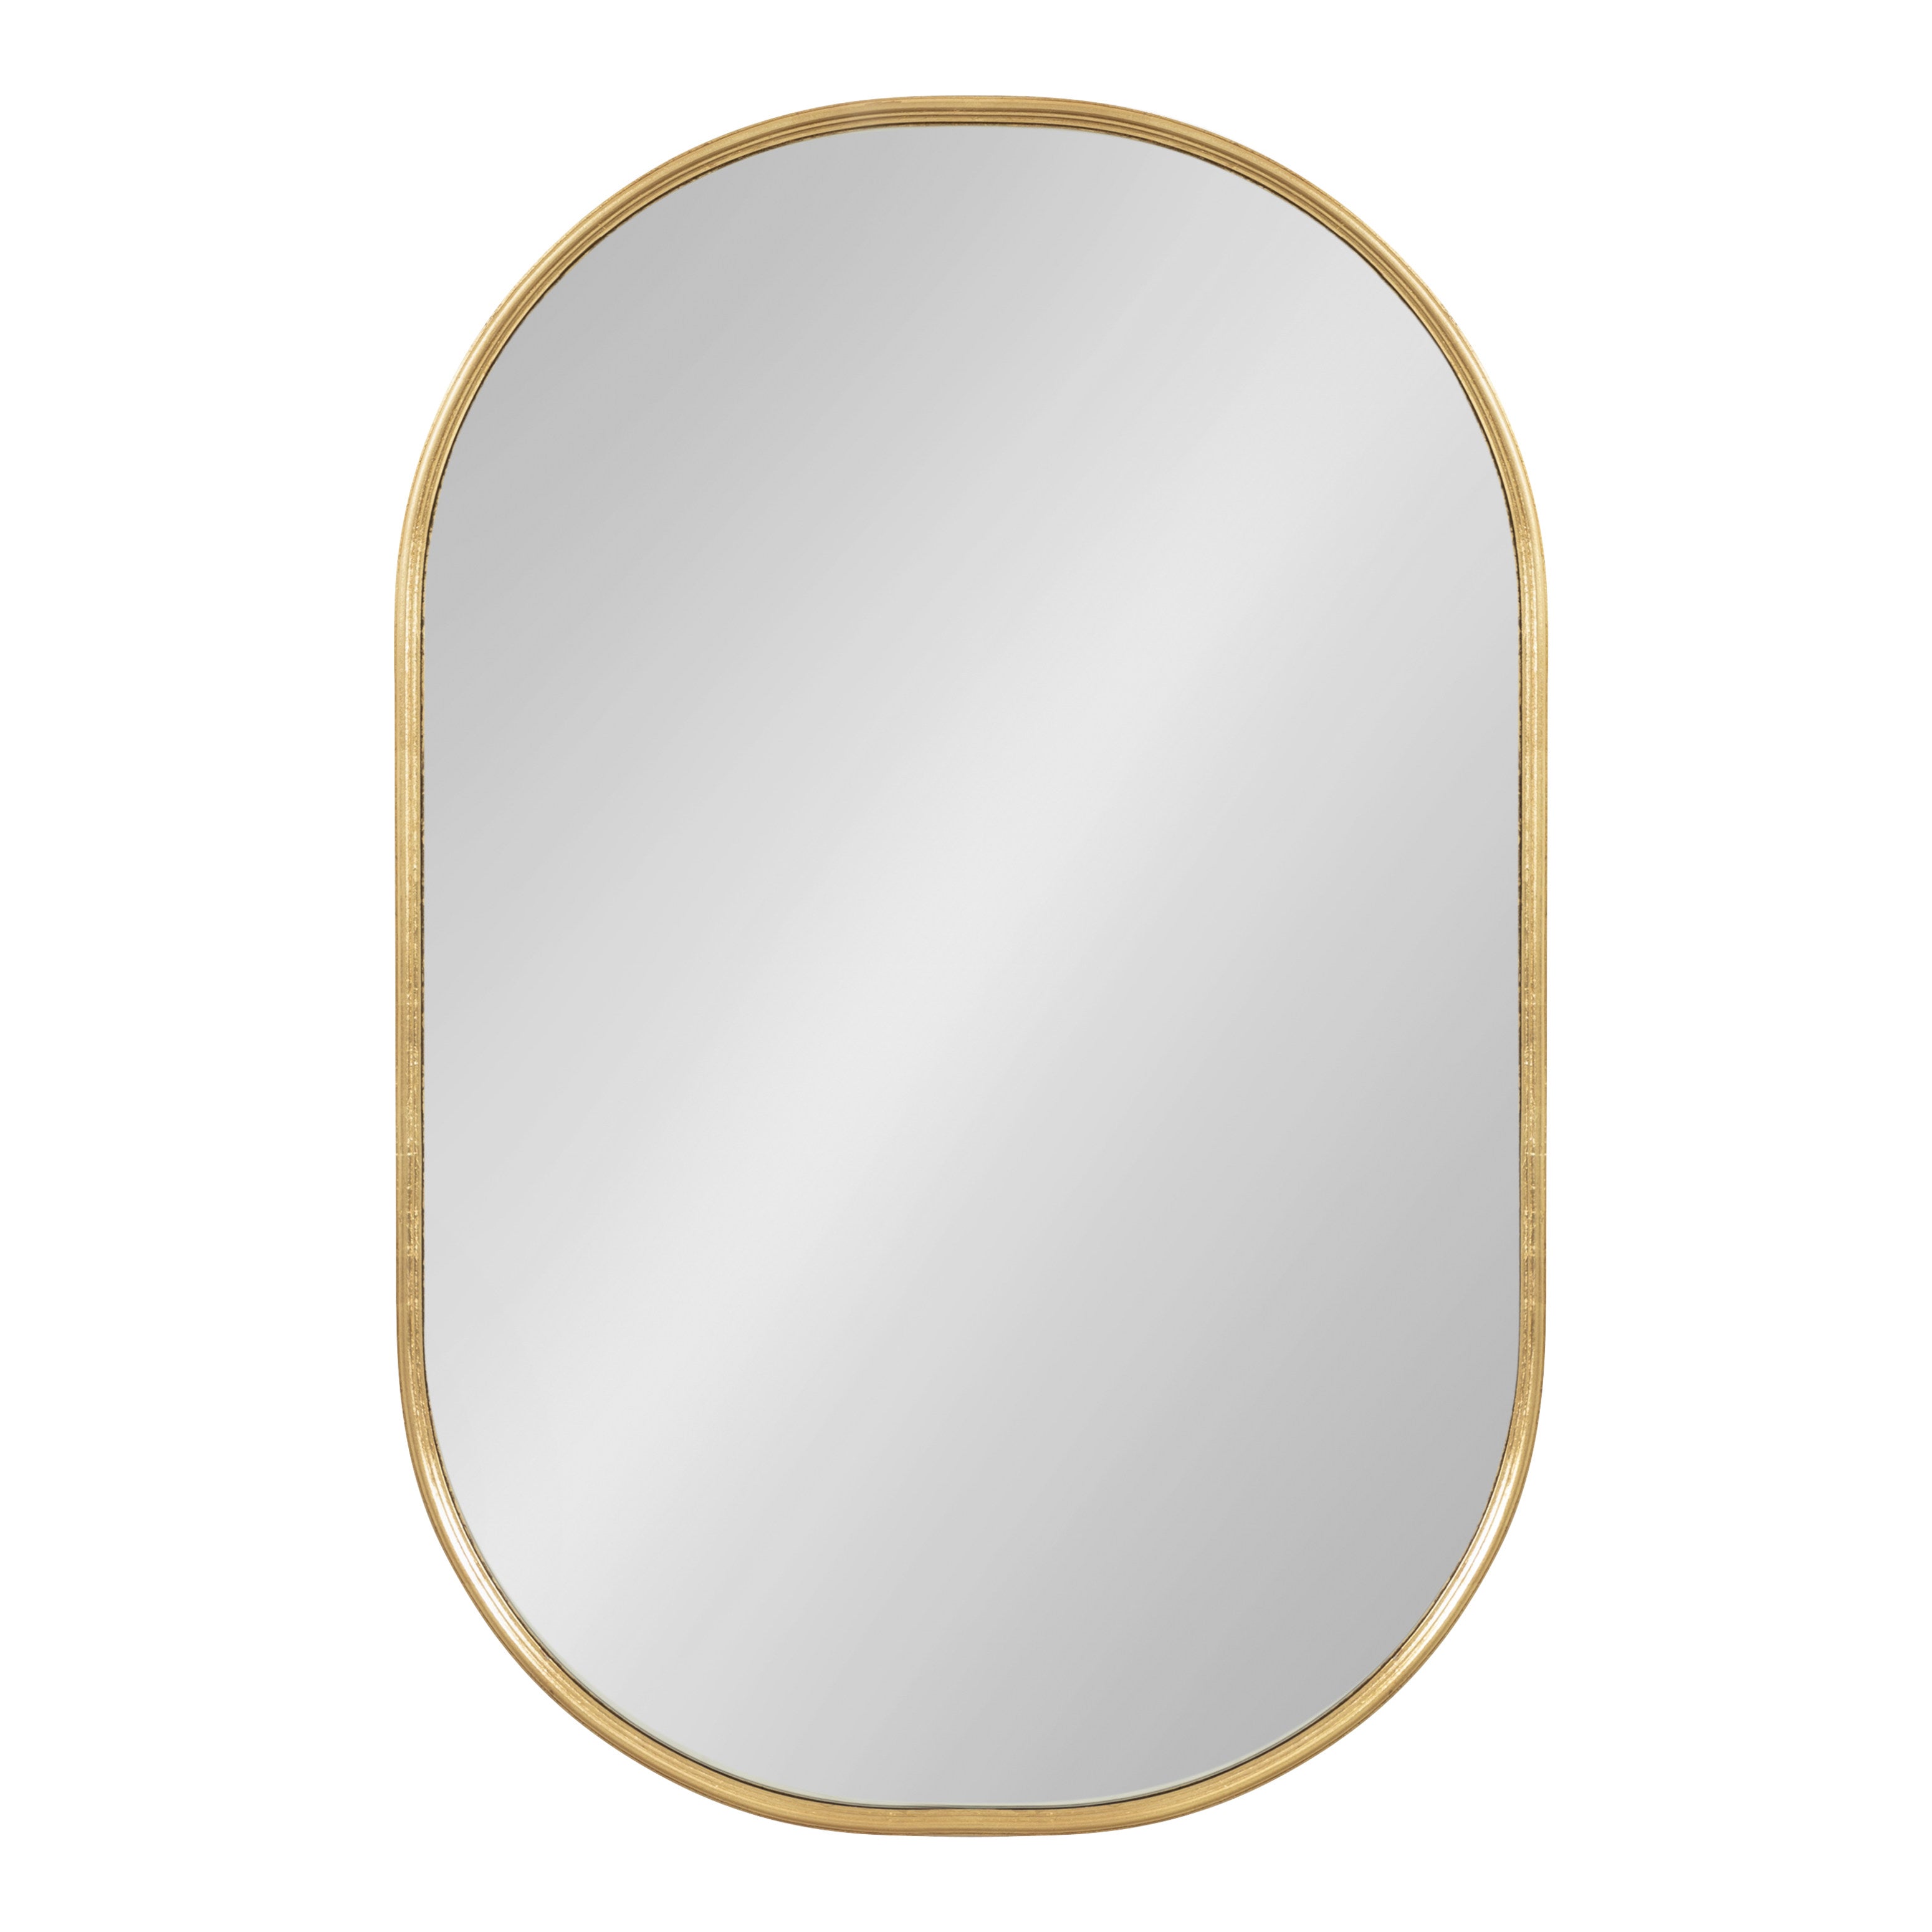 Kate and Laurel Caskill Modern Rounded Capsule Hanging Wall Mirror, 22 x  34, Gold, Glam Round Rectangular Narrow Mirror for Wall – kateandlaurel